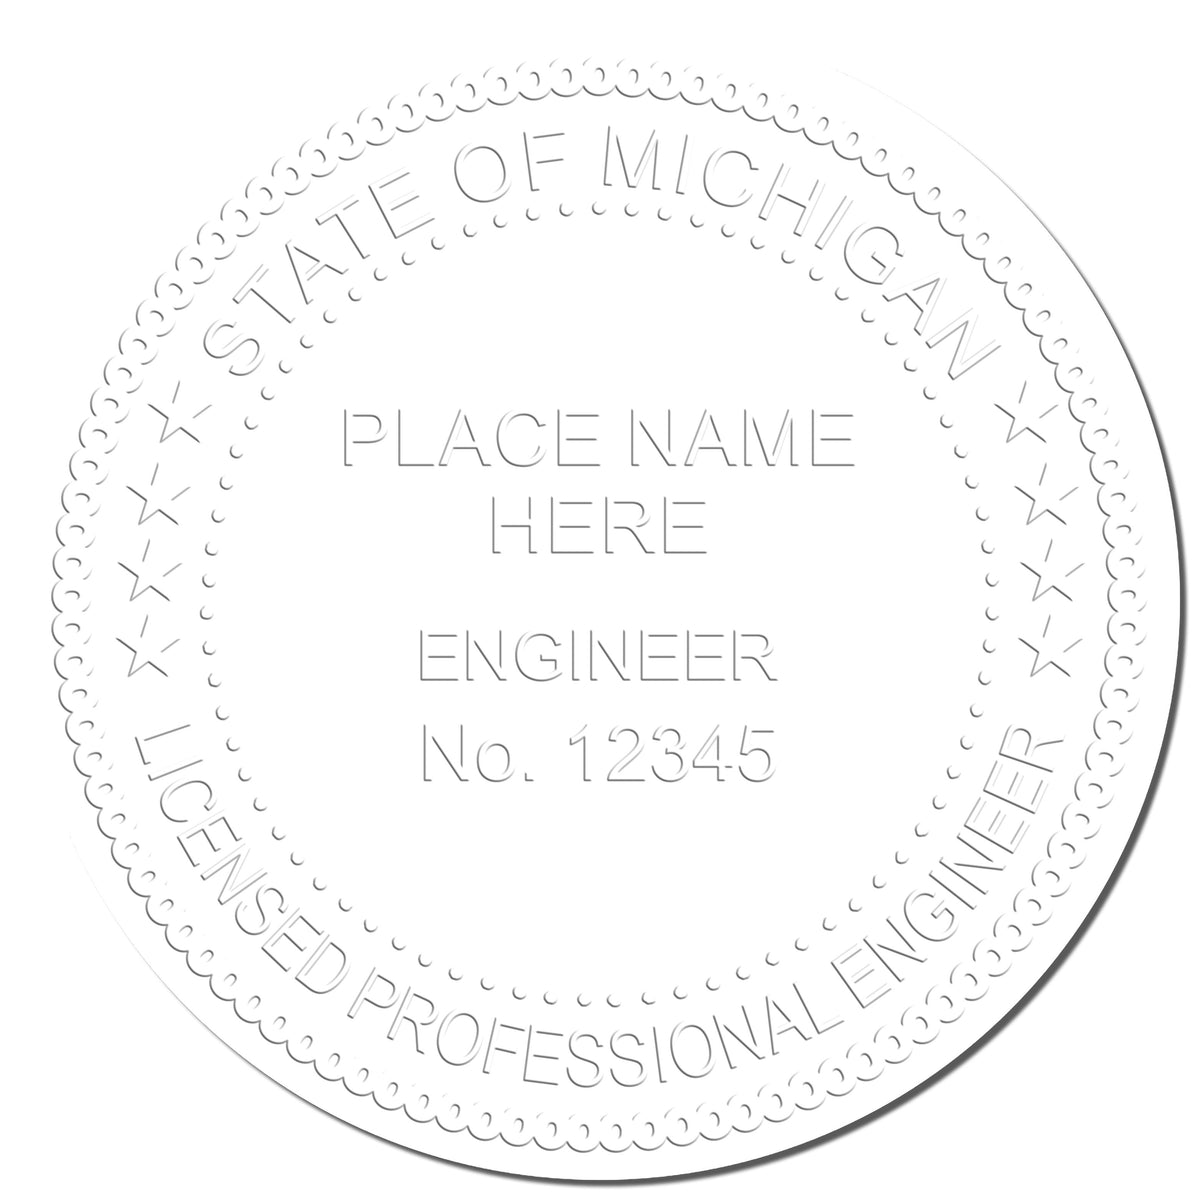 Another Example of a stamped impression of the Michigan Engineer Desk Seal on a piece of office paper.